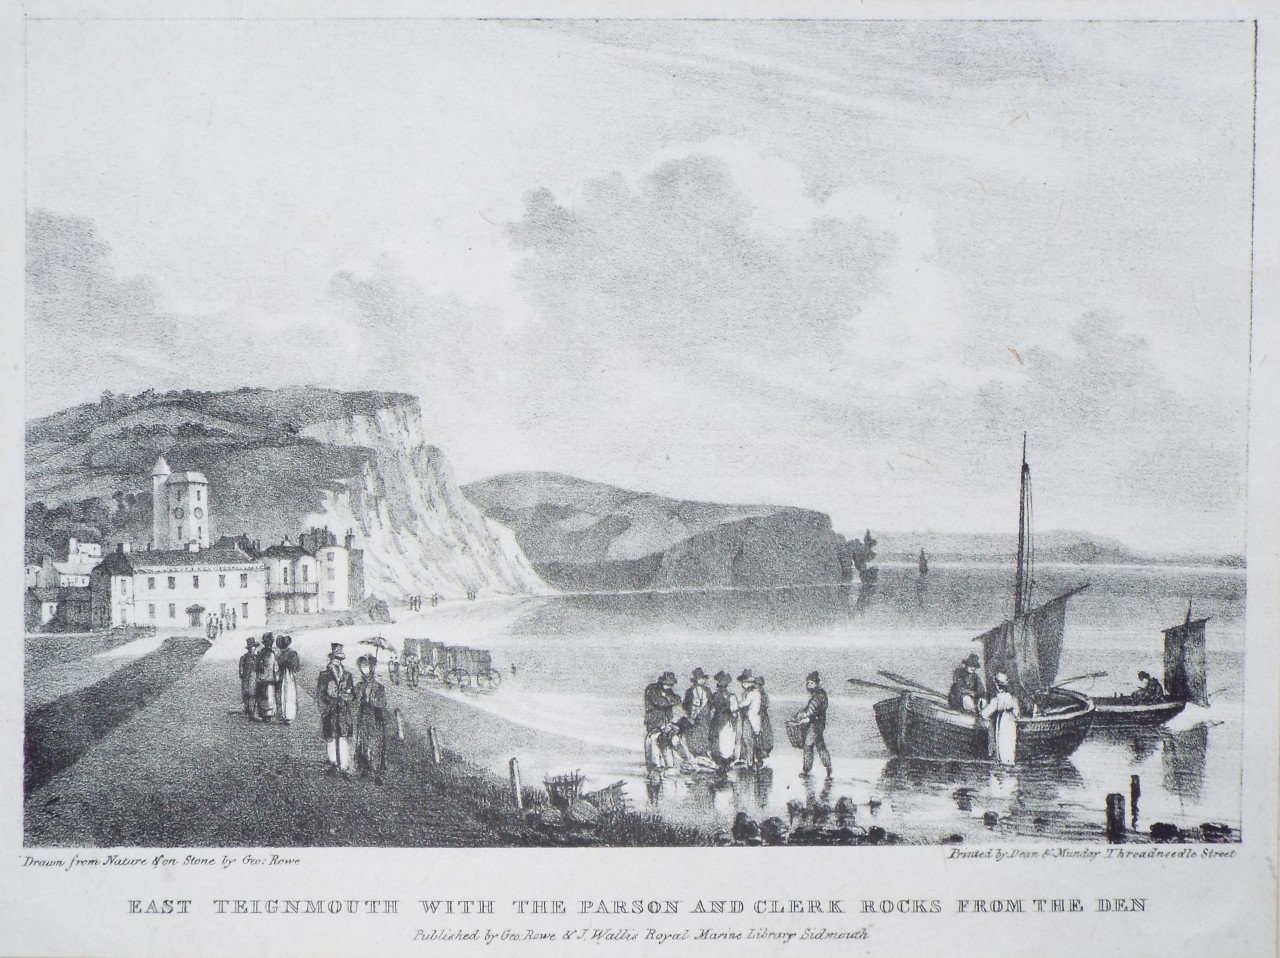 Print - East Teignmouth with the Parson and Clerk Rocks from the Den - Rowe